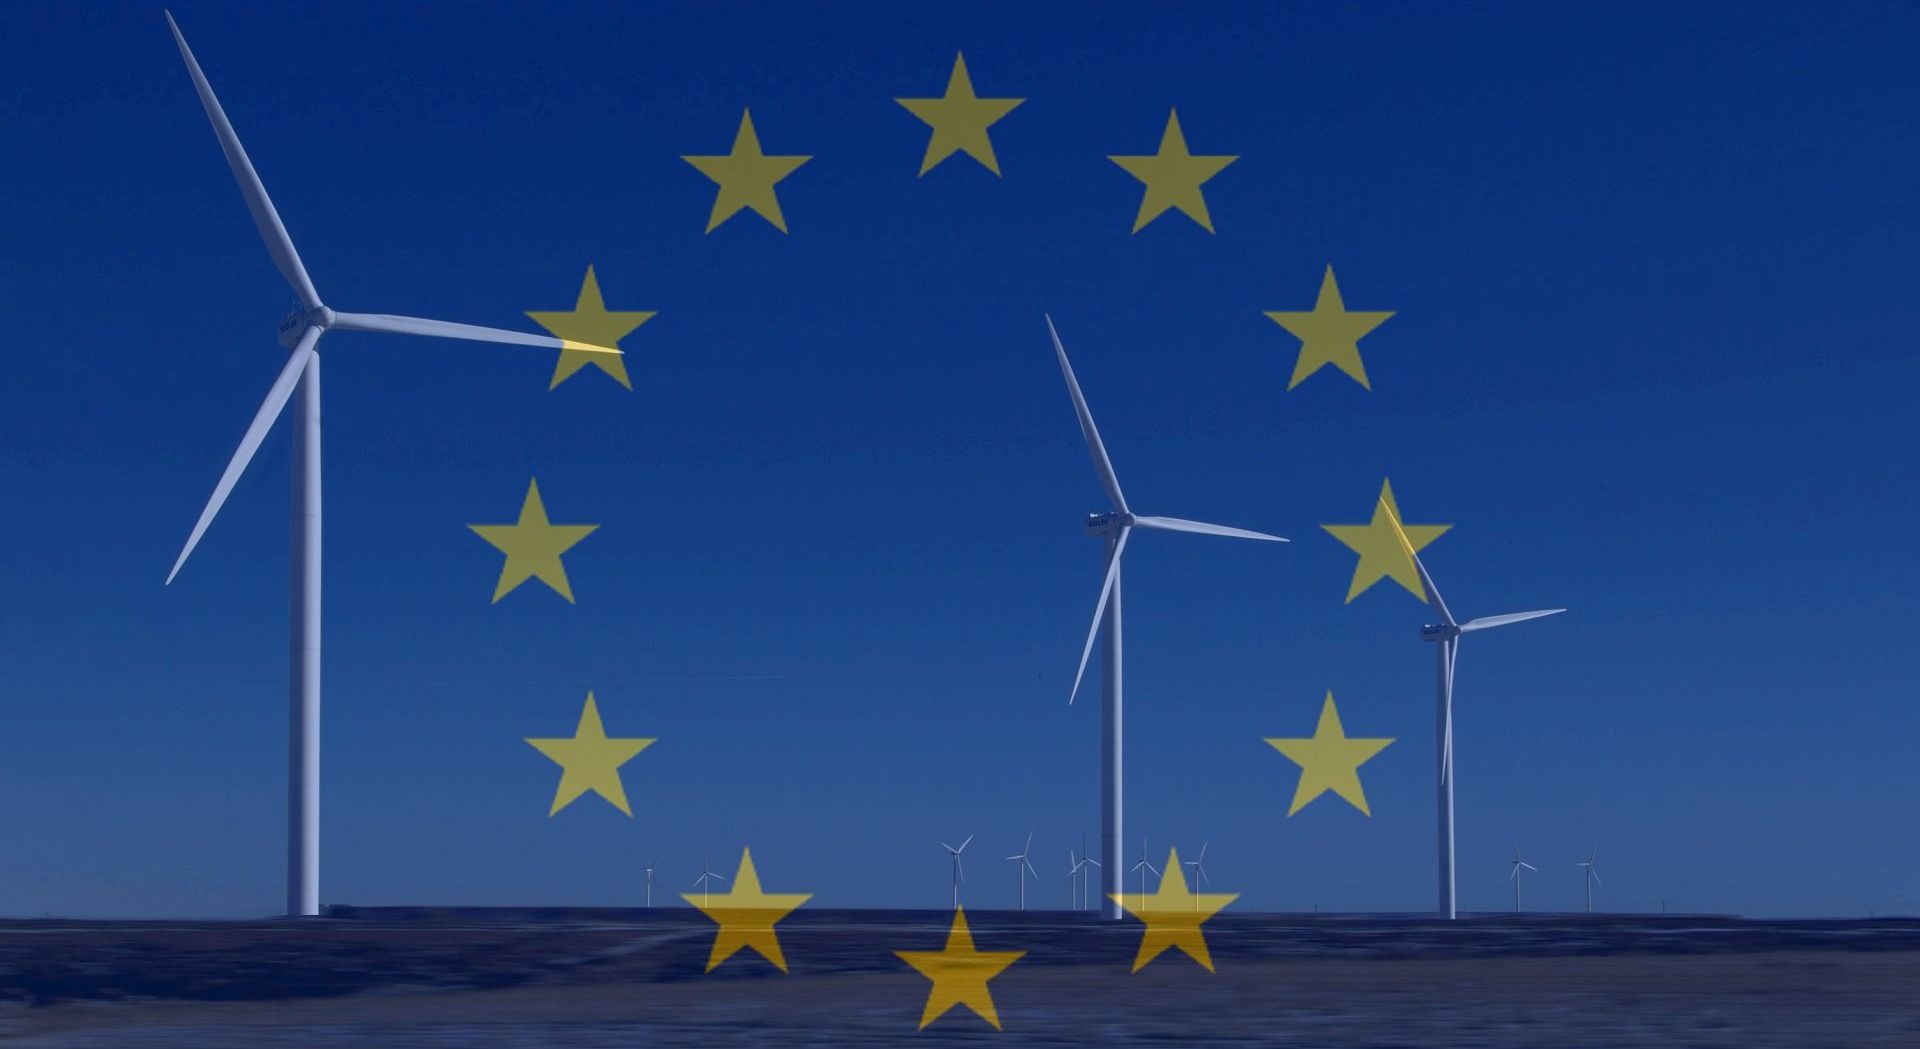 The EU flag laid over an image of wind turbines in a field